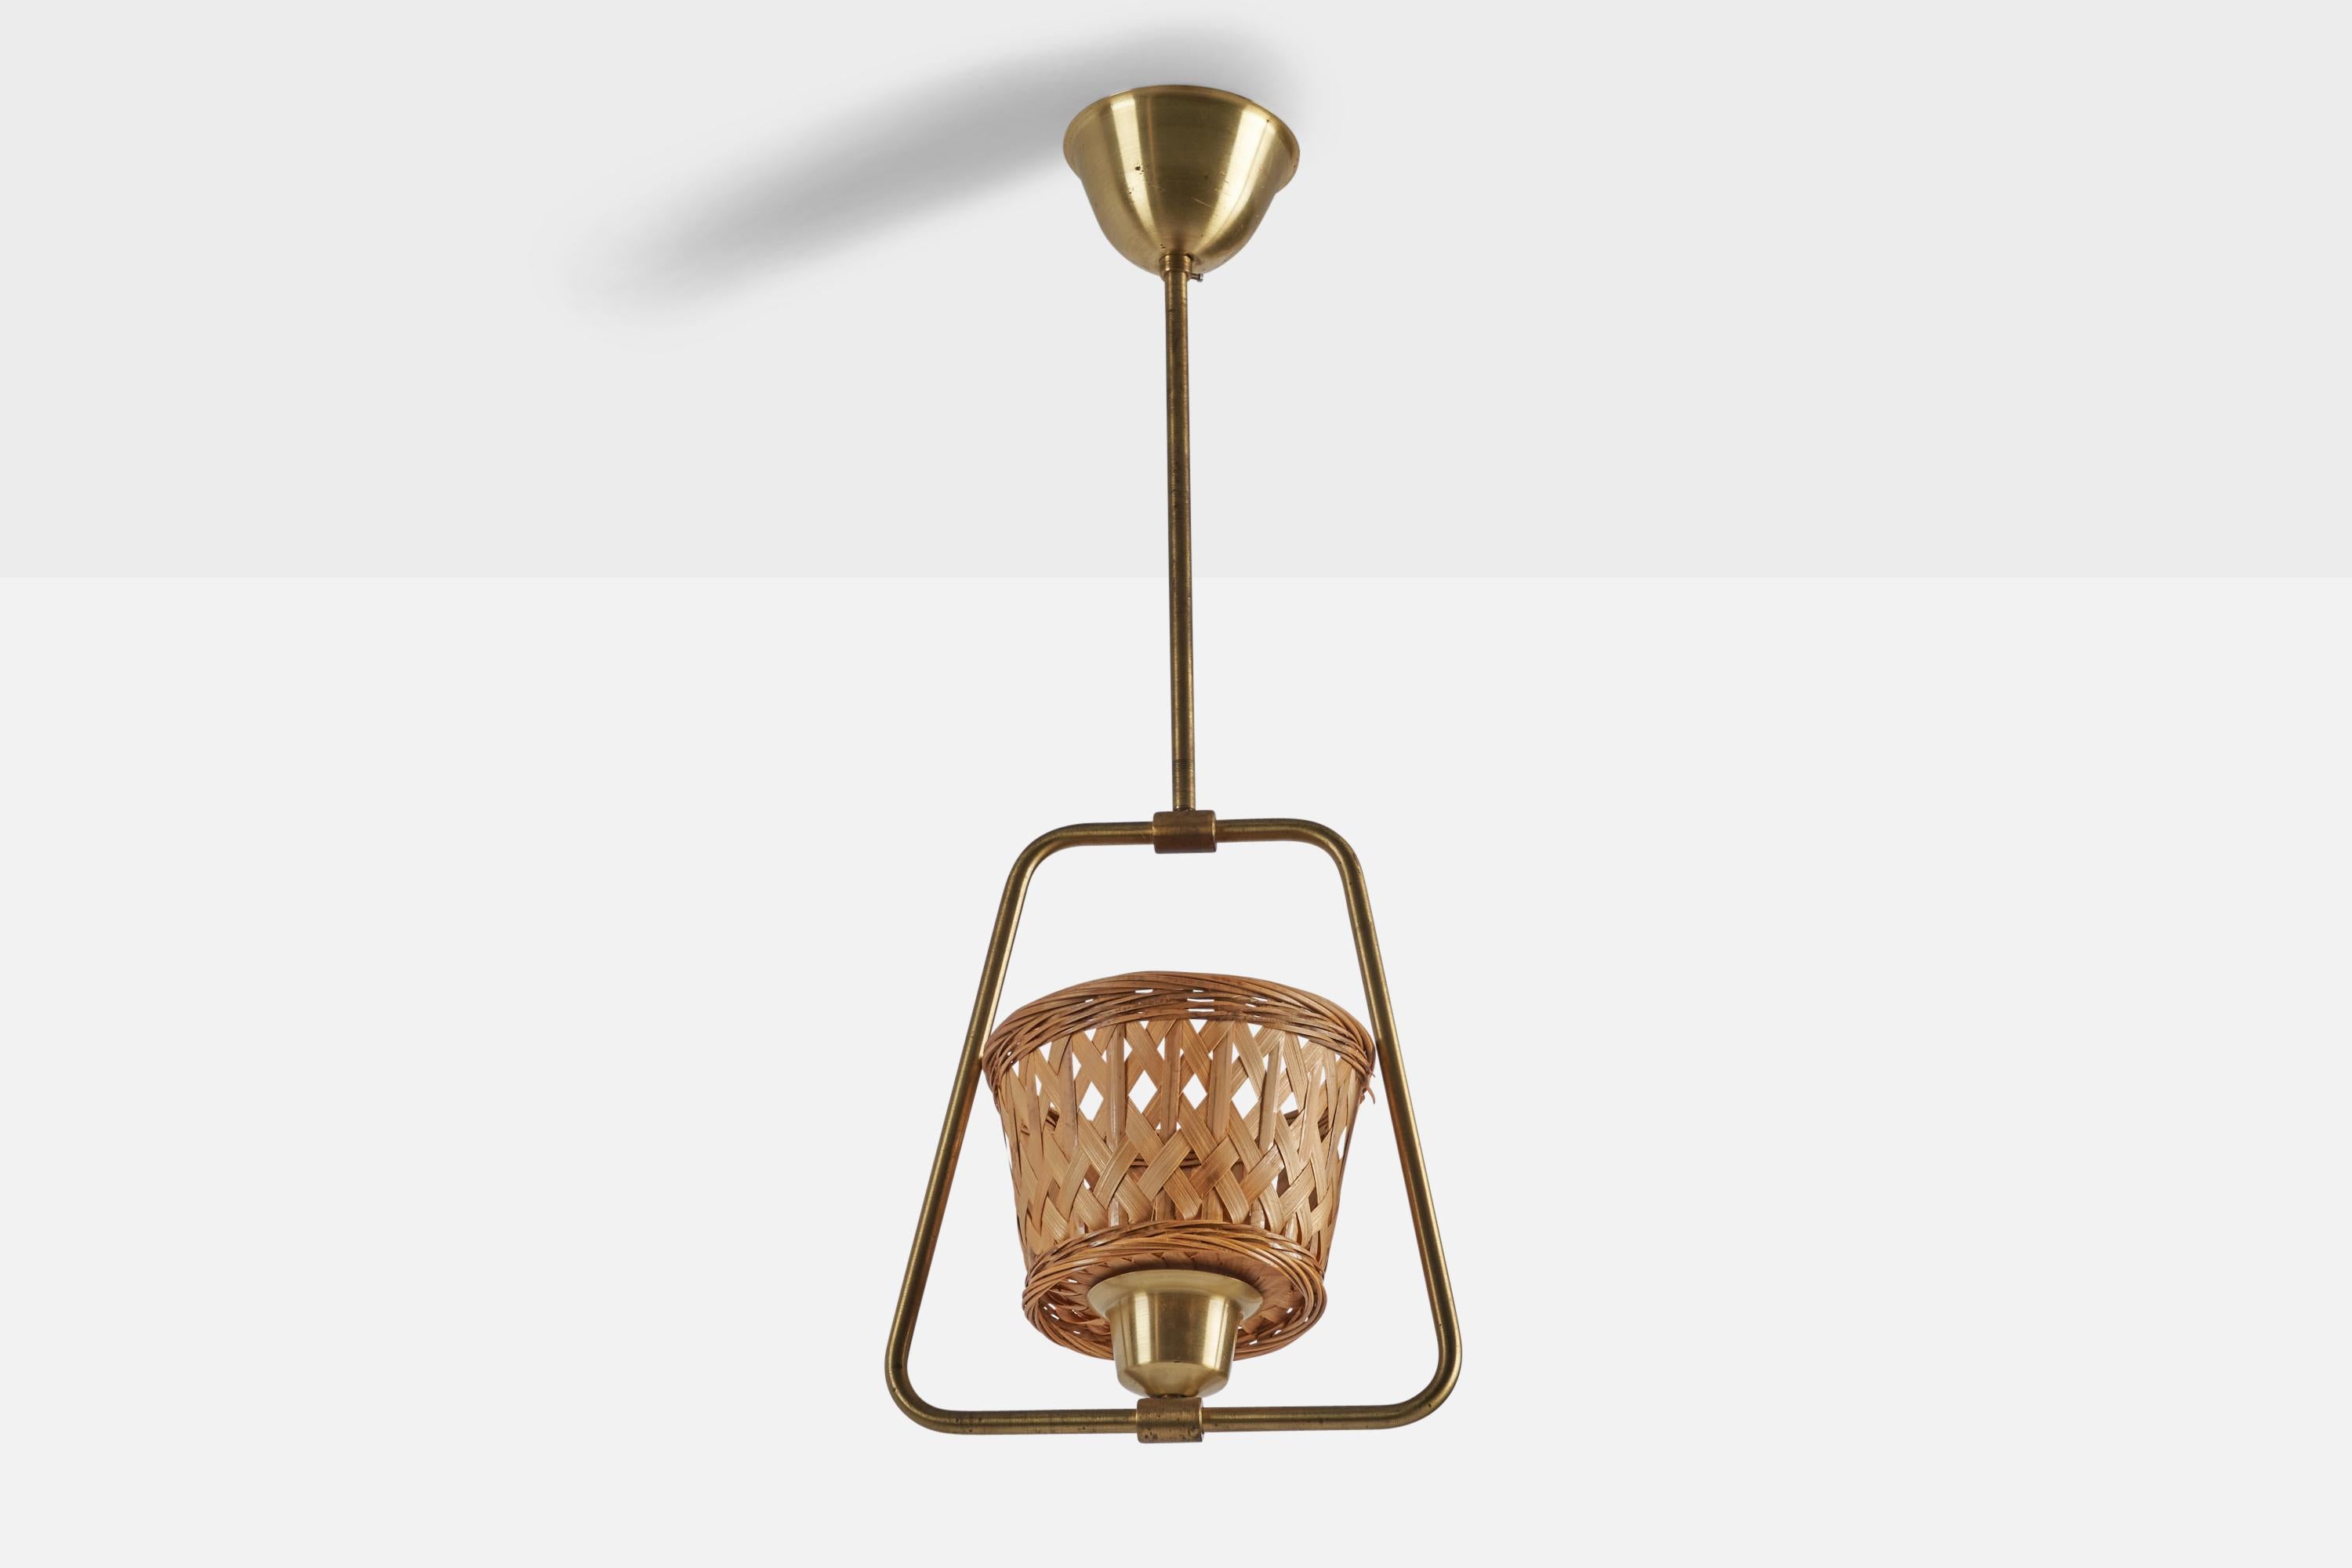 
A brass and rattan pendant light designed and produced in Sweden, c. 1940s.
Overall Dimensions (inches): 33.5” H x 9” W x 6.35” D
Bulb Specifications: E-26 Bulb
Number of Sockets: 1
All lighting will be converted for US usage. We are unable to